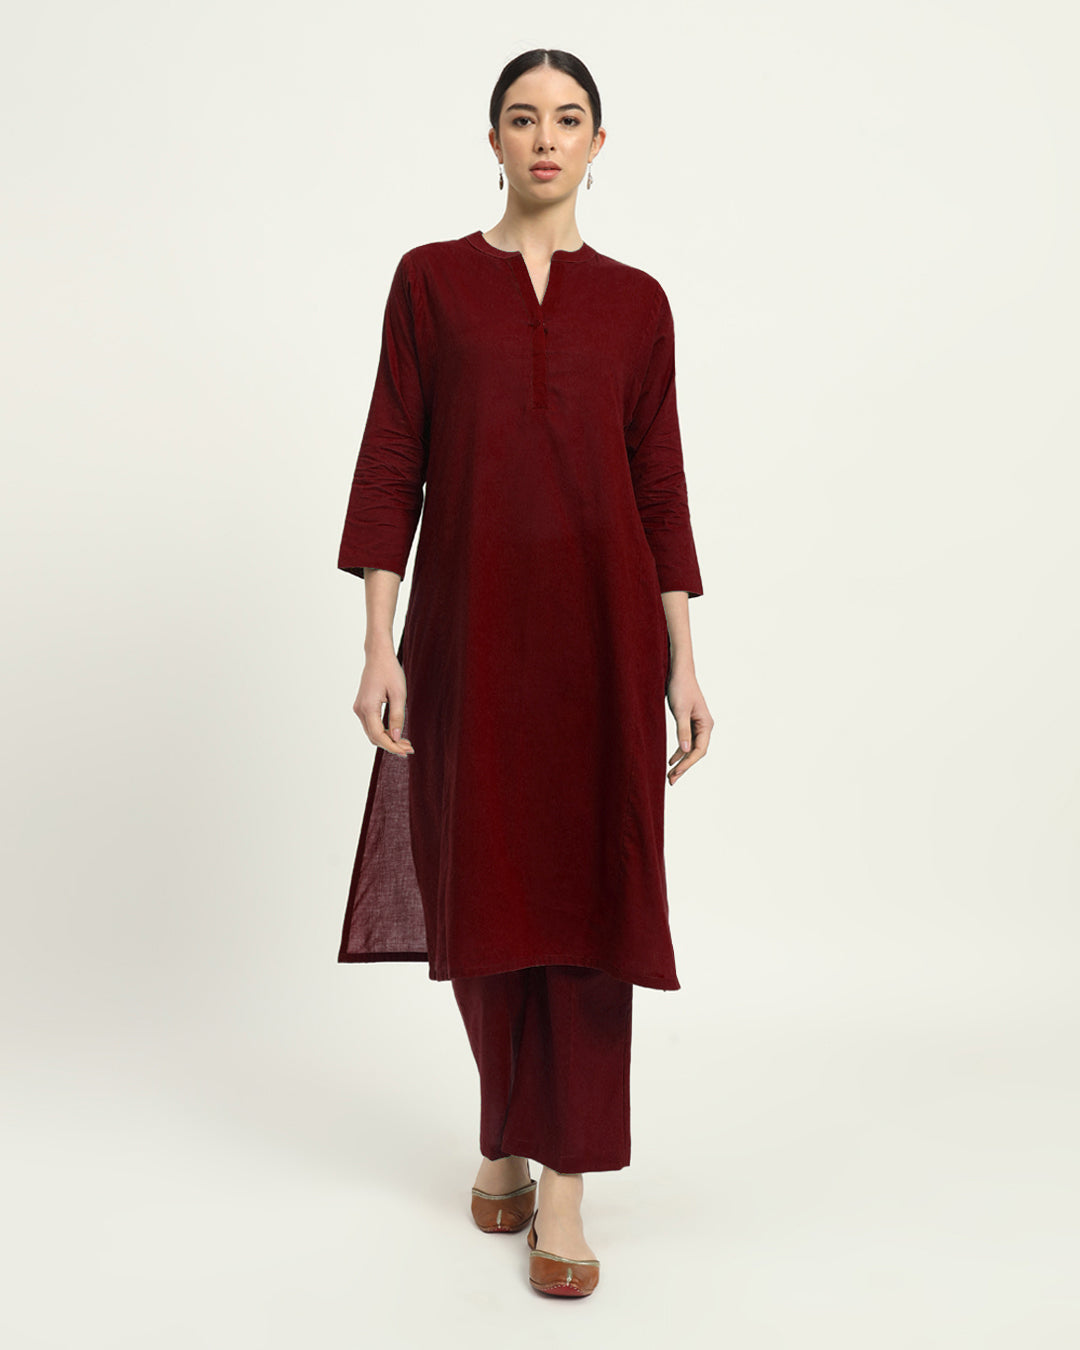 Russet Red Everyday Bliss Notch Neck Solid Kurta (Without Bottoms)